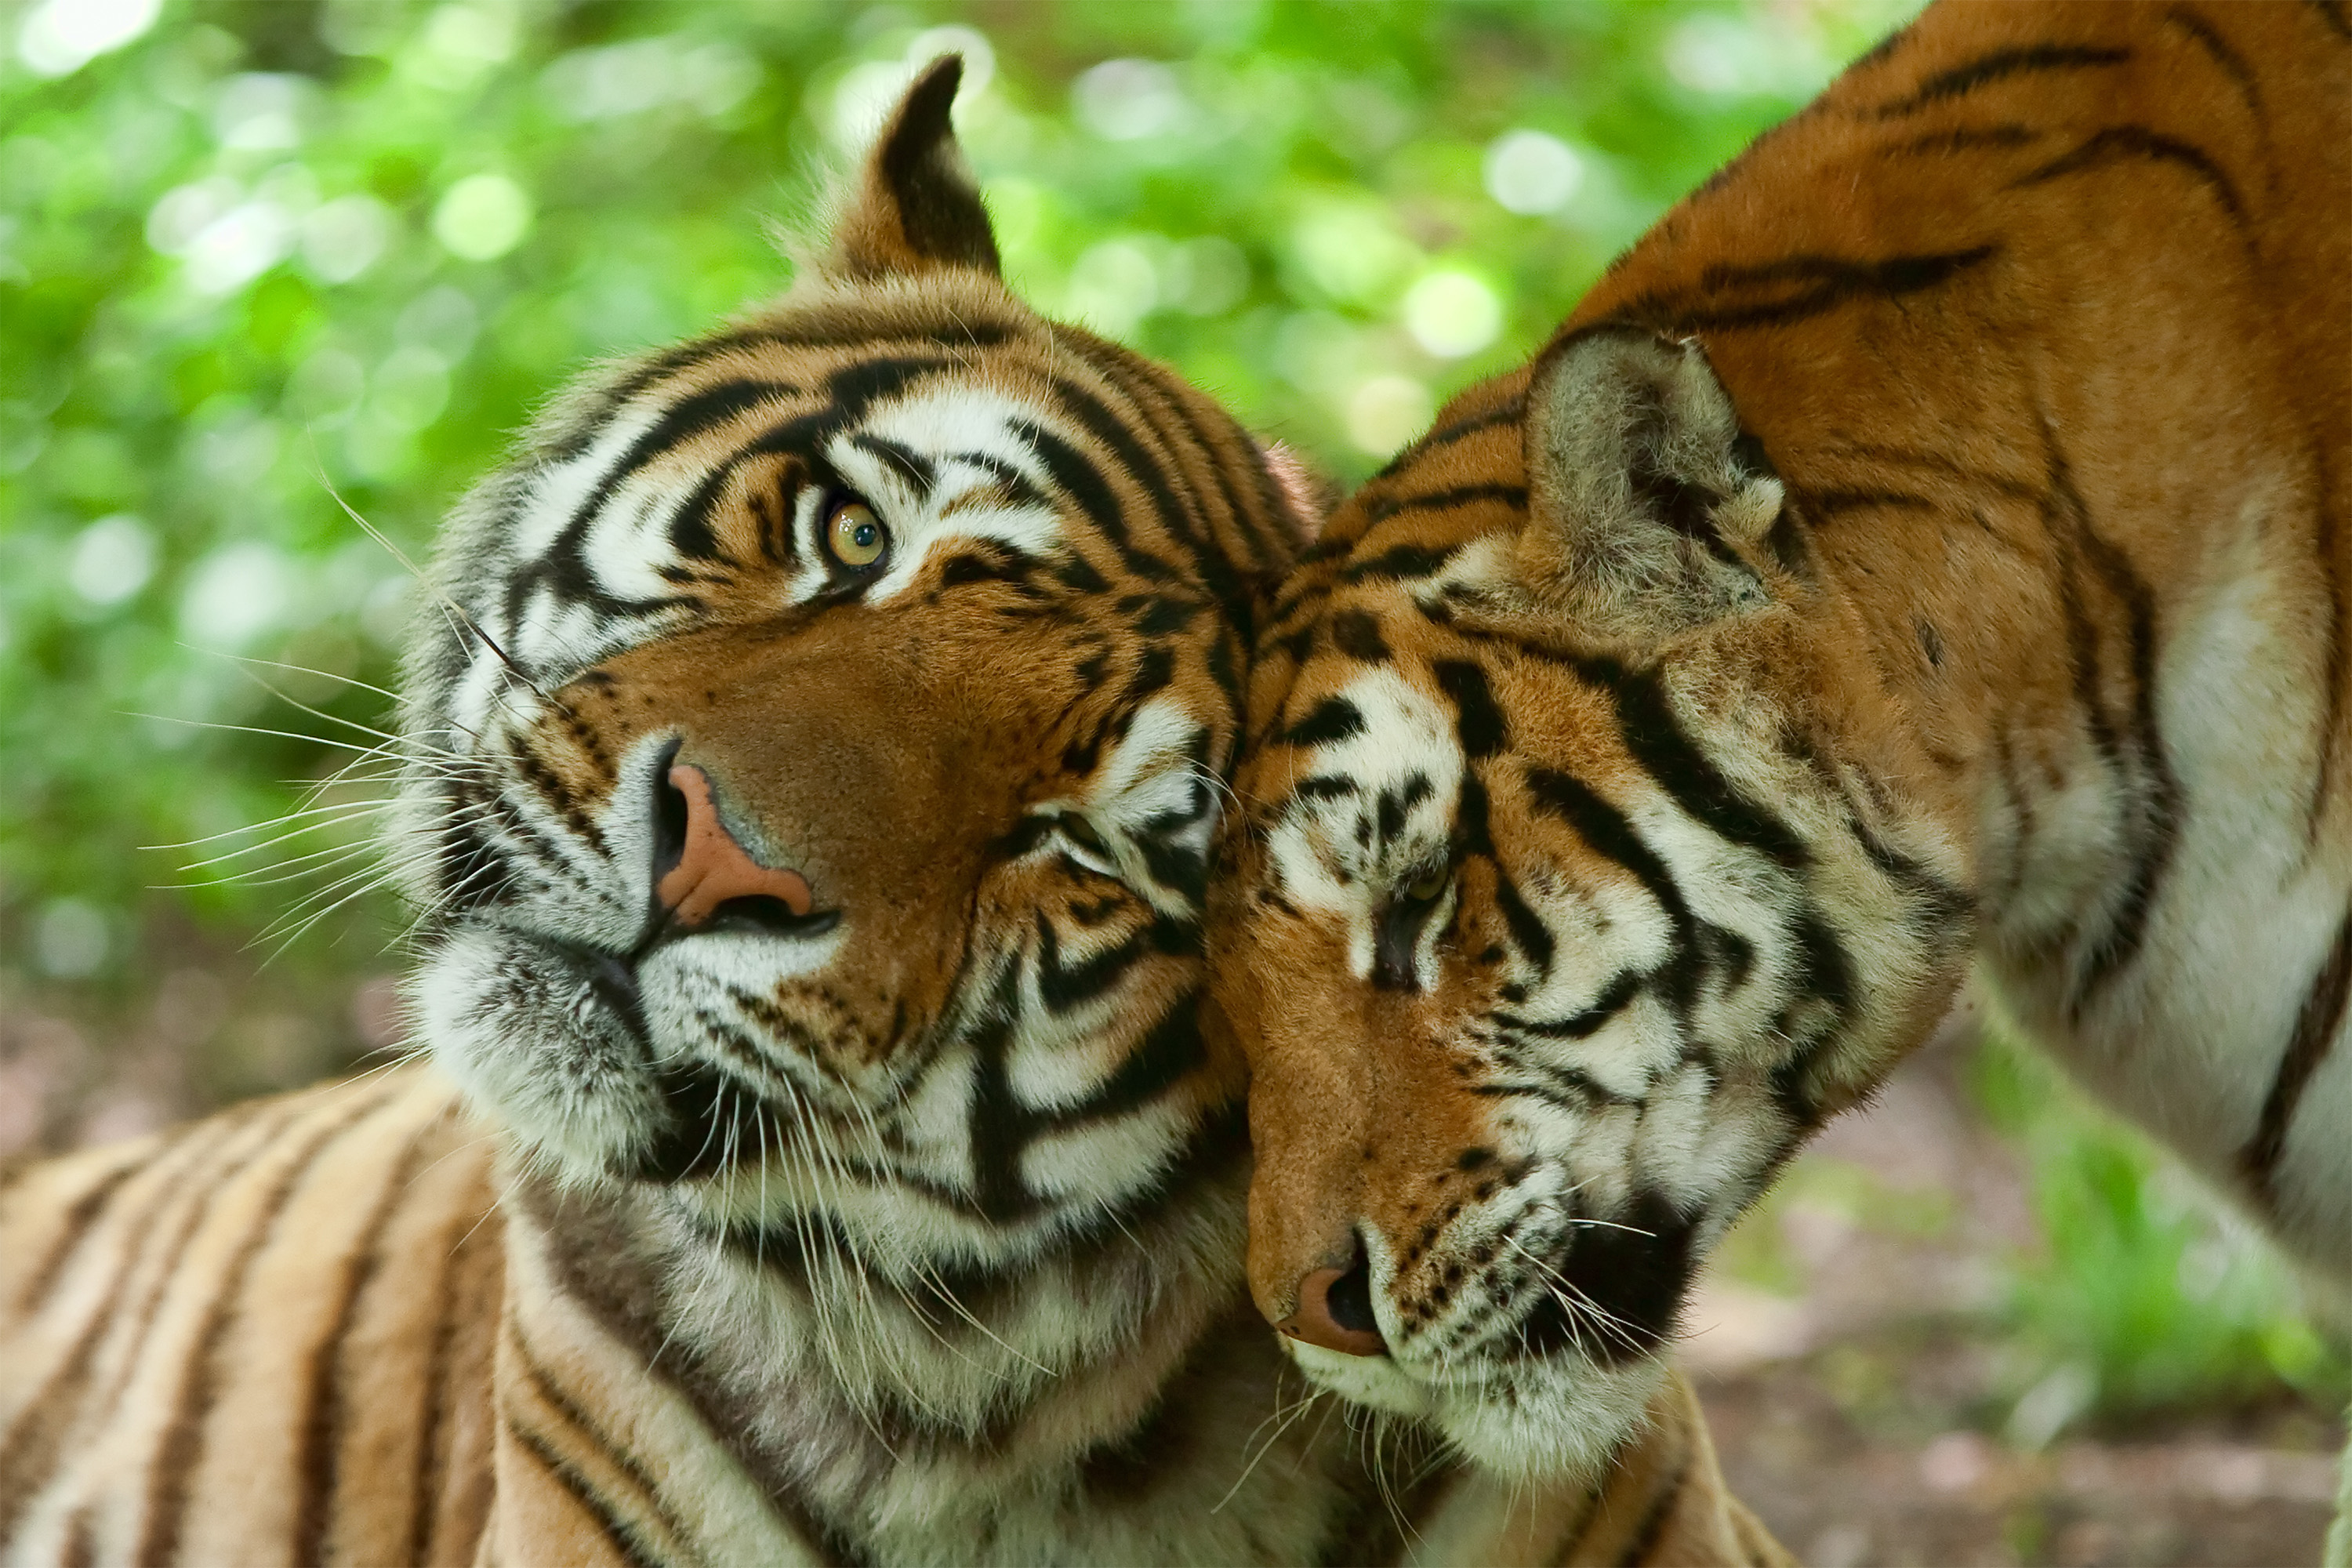 Tigers. Shutterstock low res.